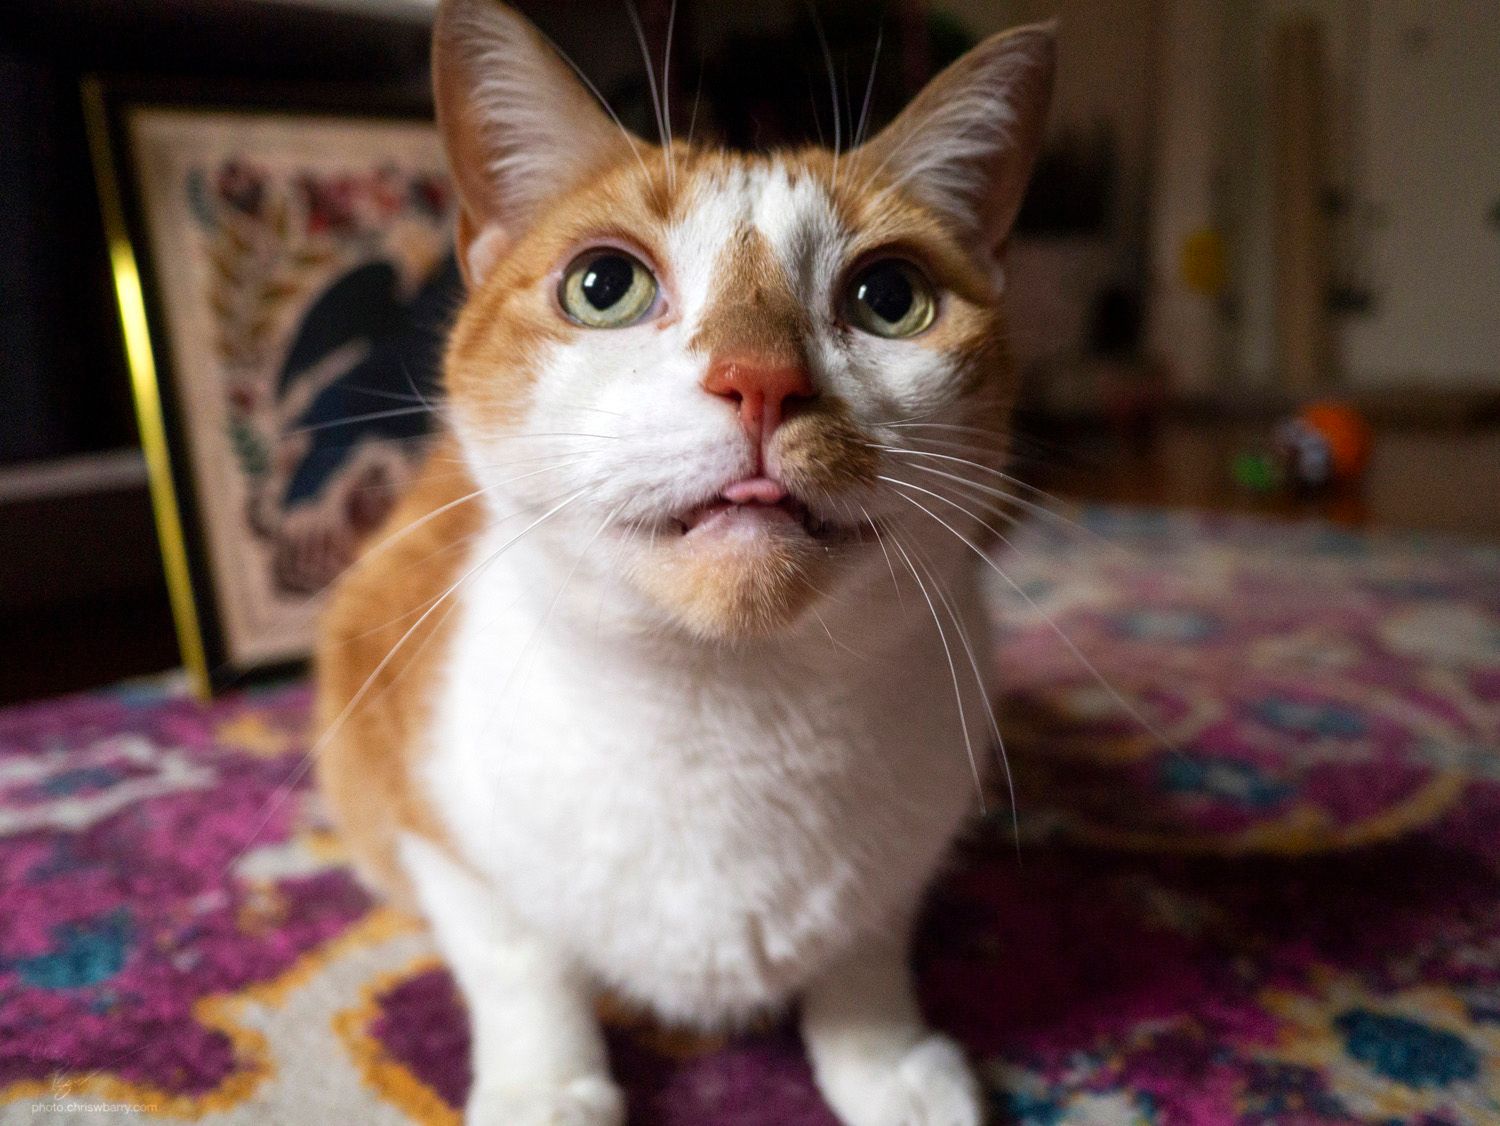 An orange and white cat crouched in the center of the frame. He's looking above the camera, and his tongue is slightly out